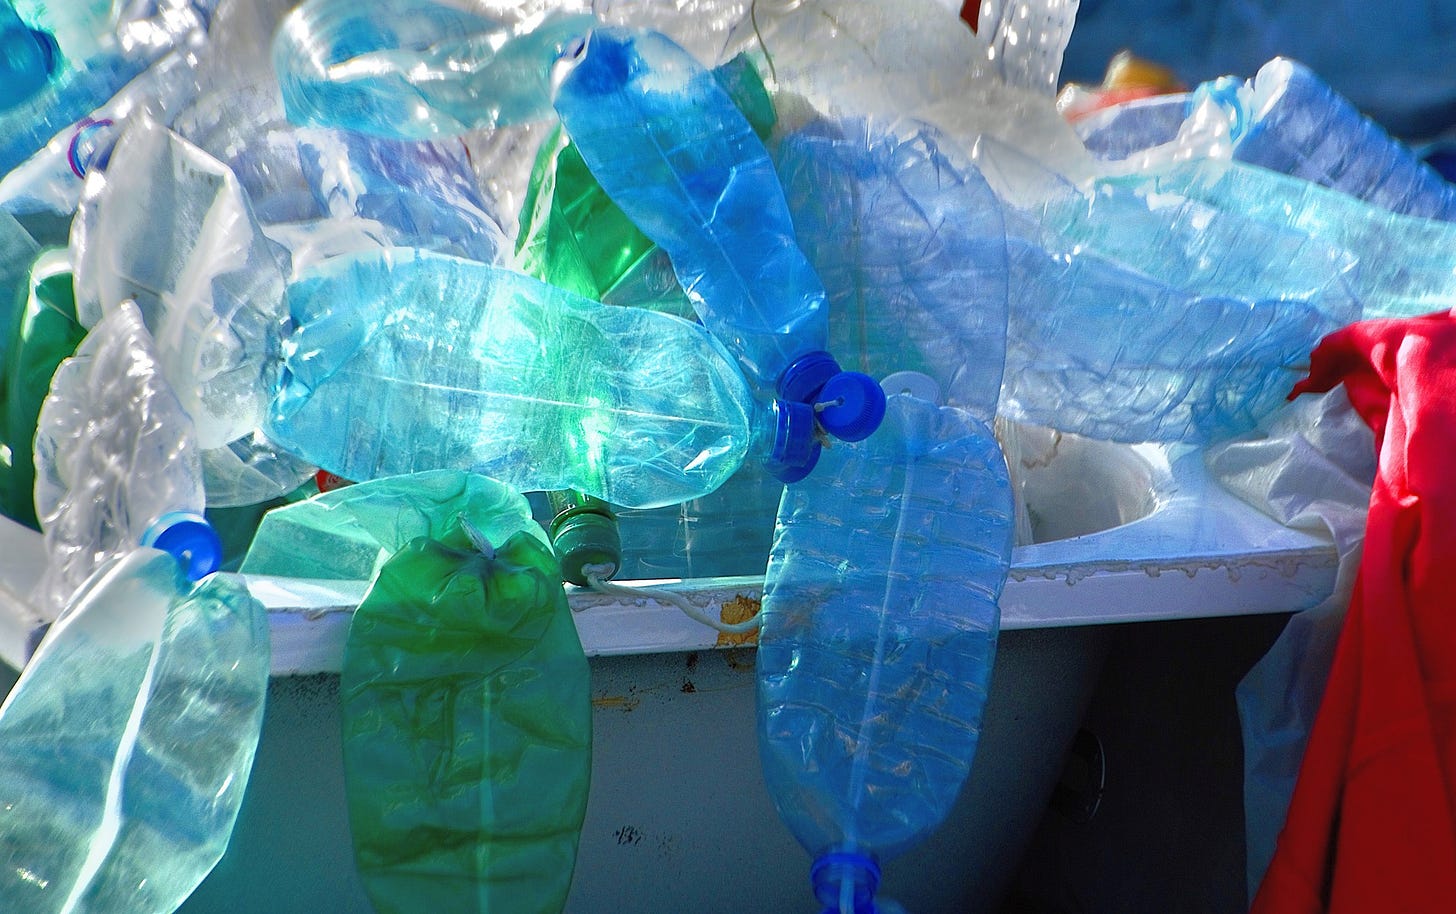 Plastic bottles and bags in a dumpster.